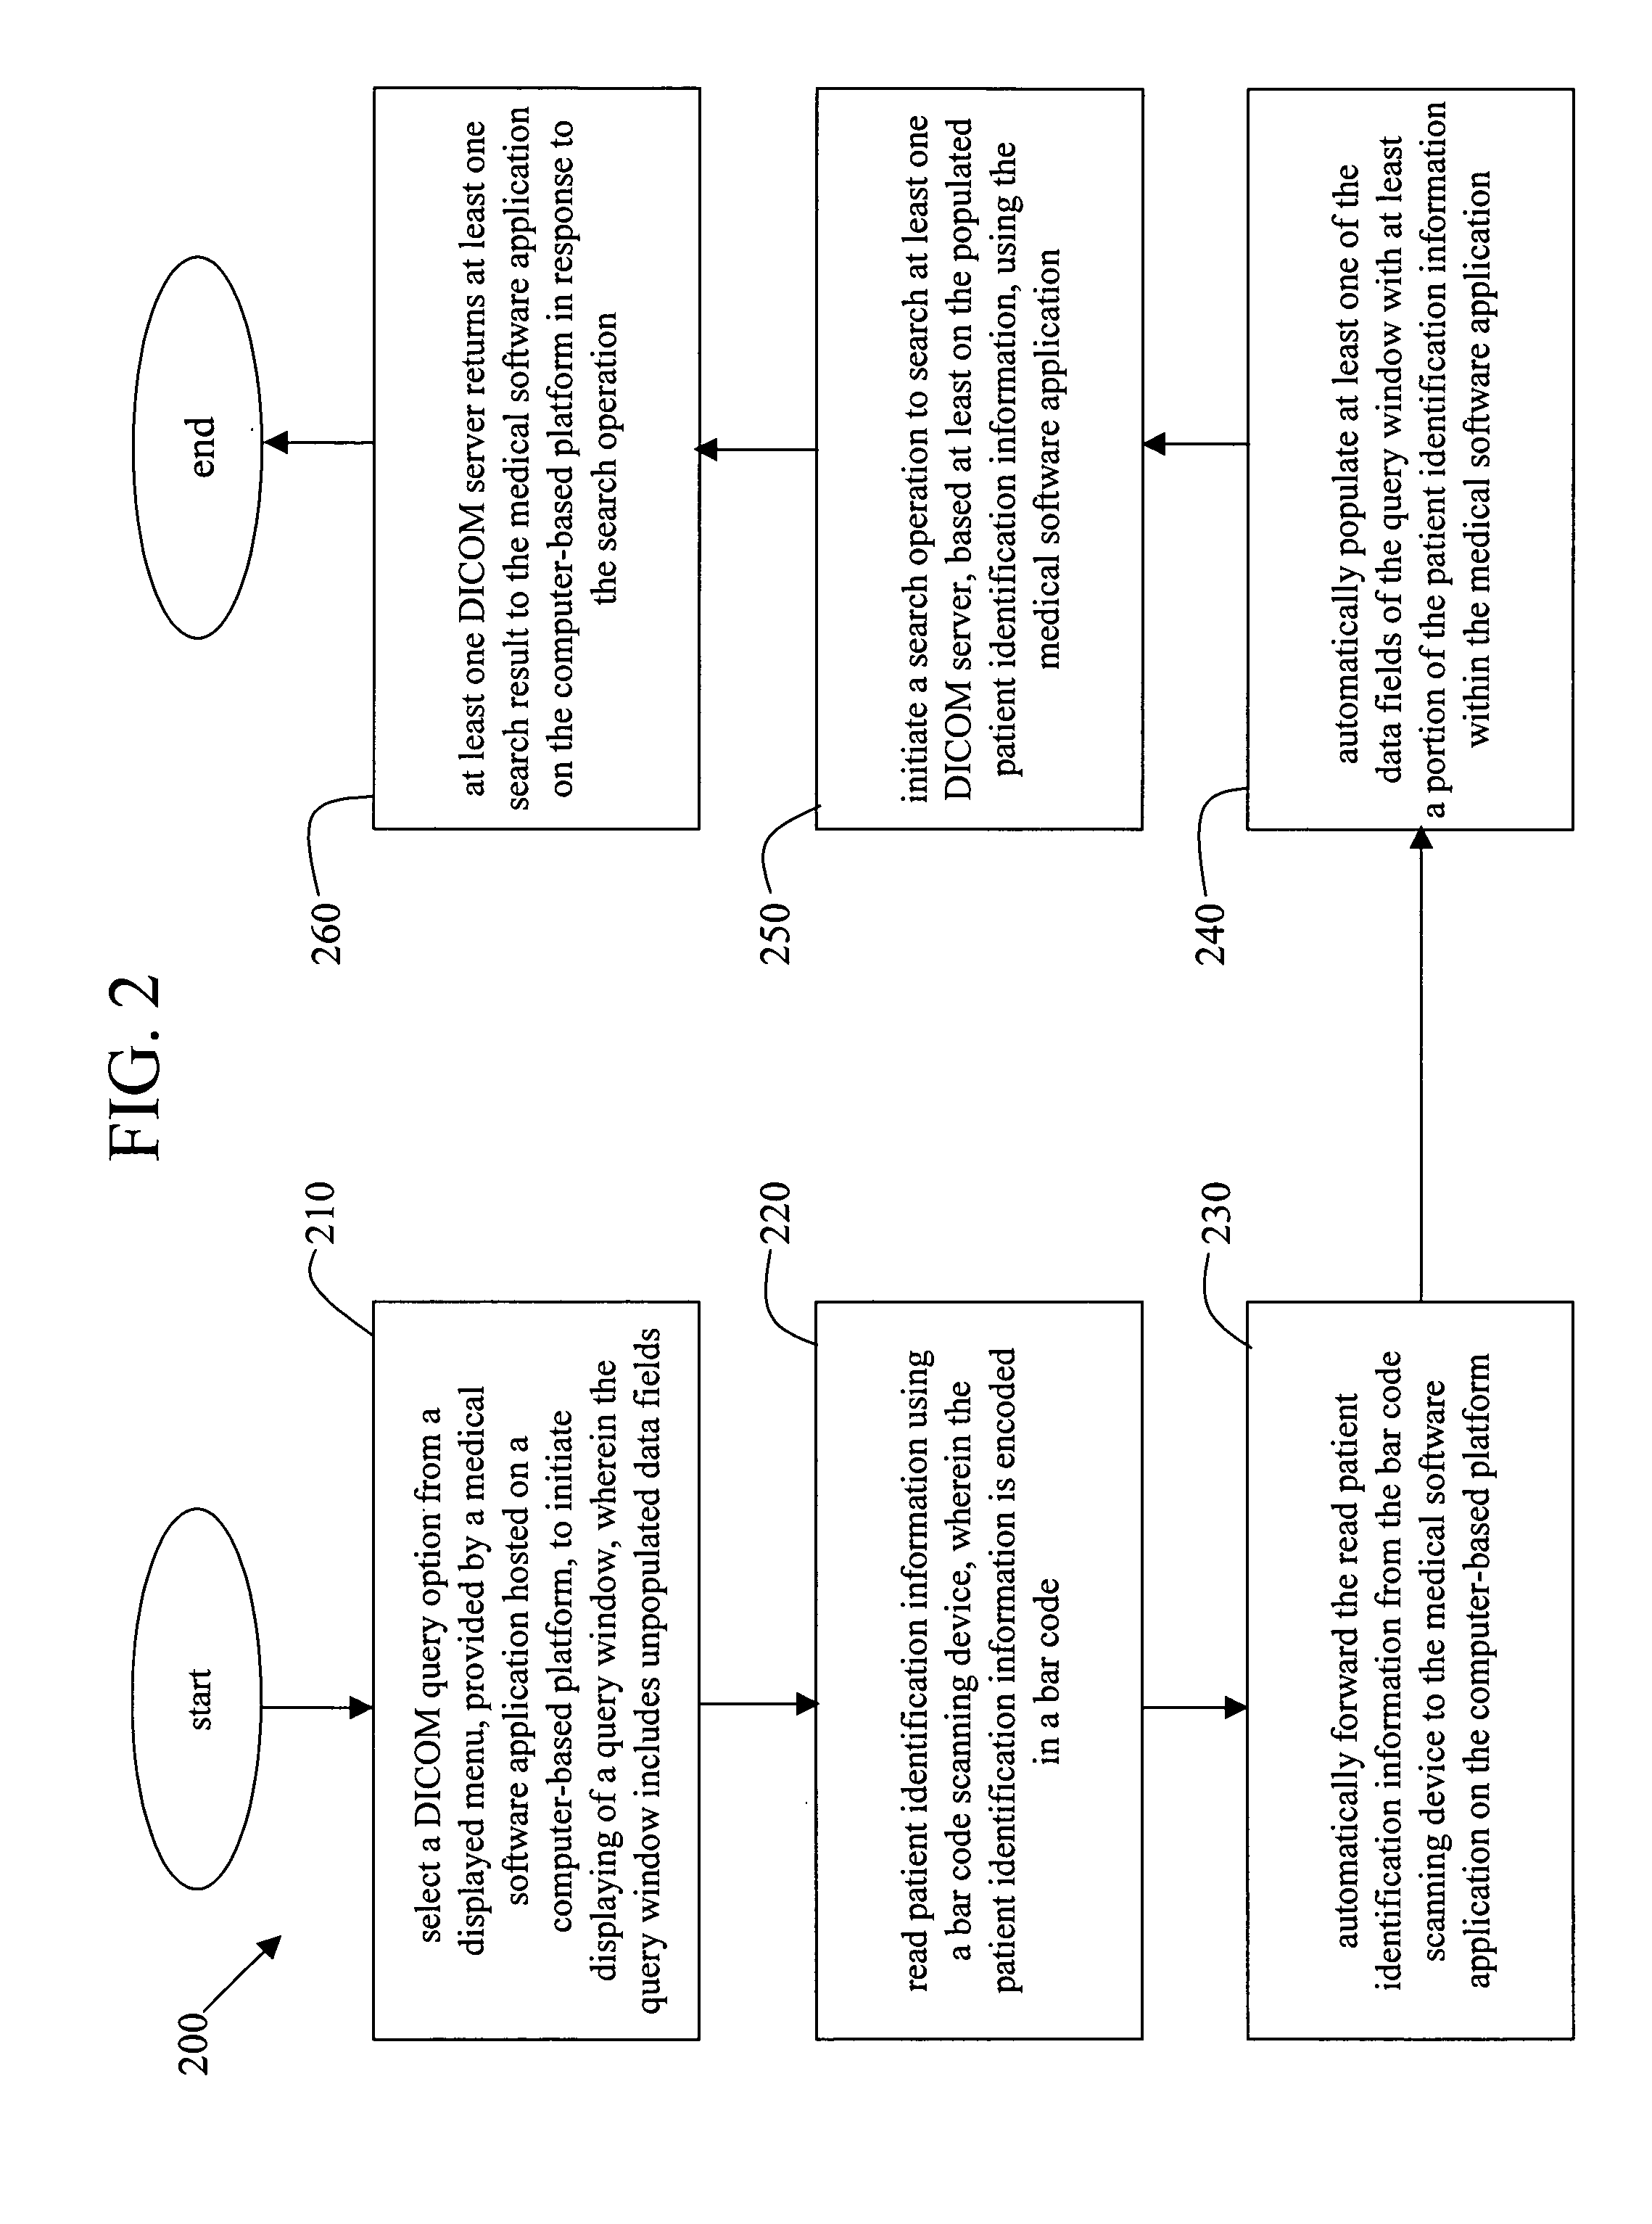 System and method for the automatic generation of a query to a DICOM server